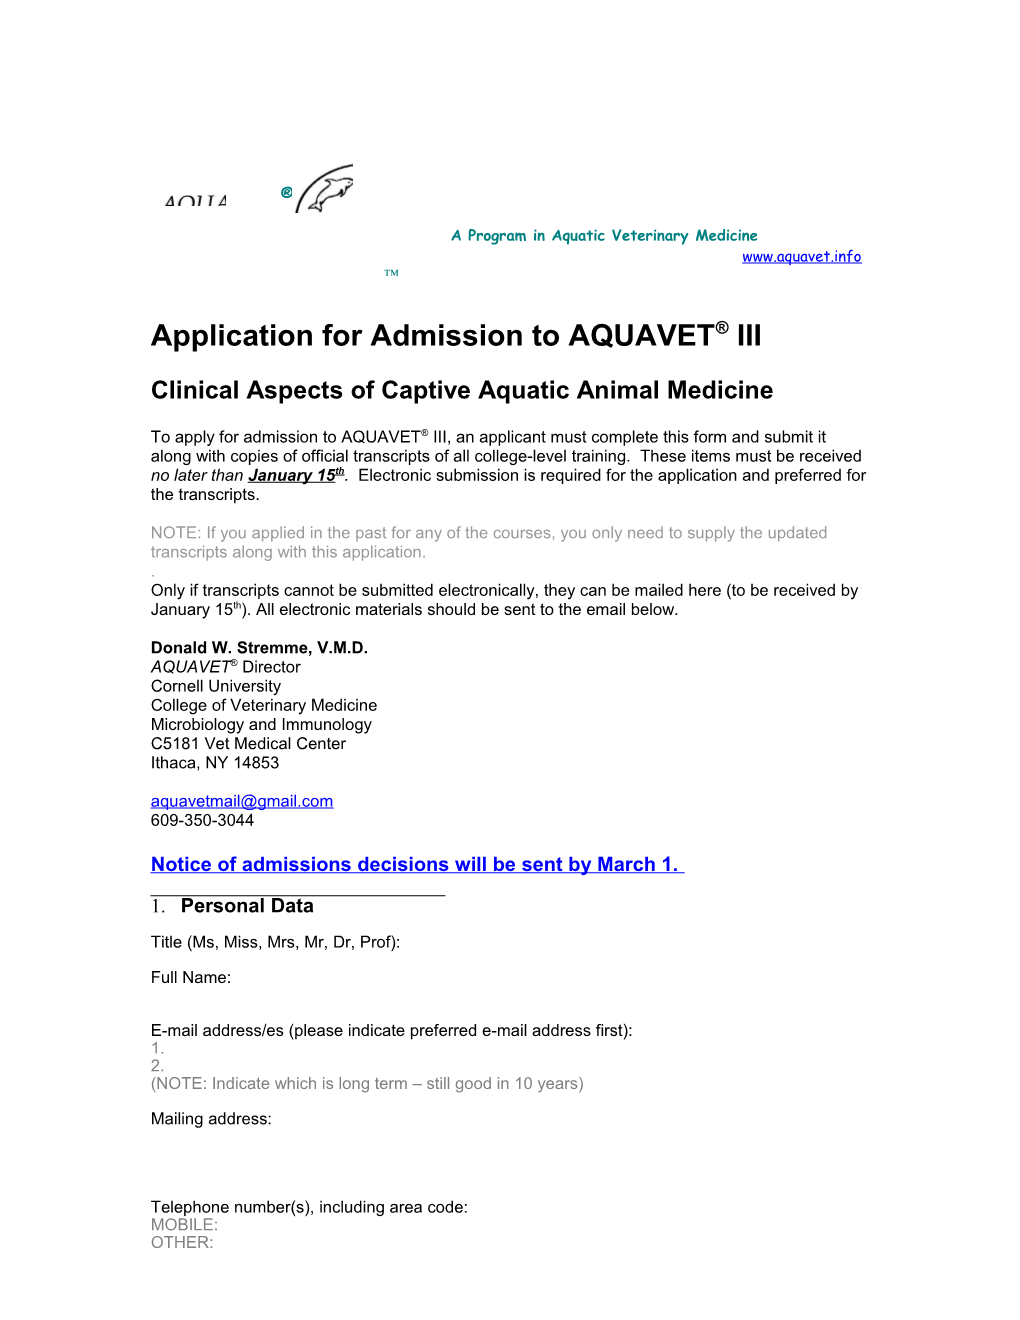 Application for Admission to AQUAVET III